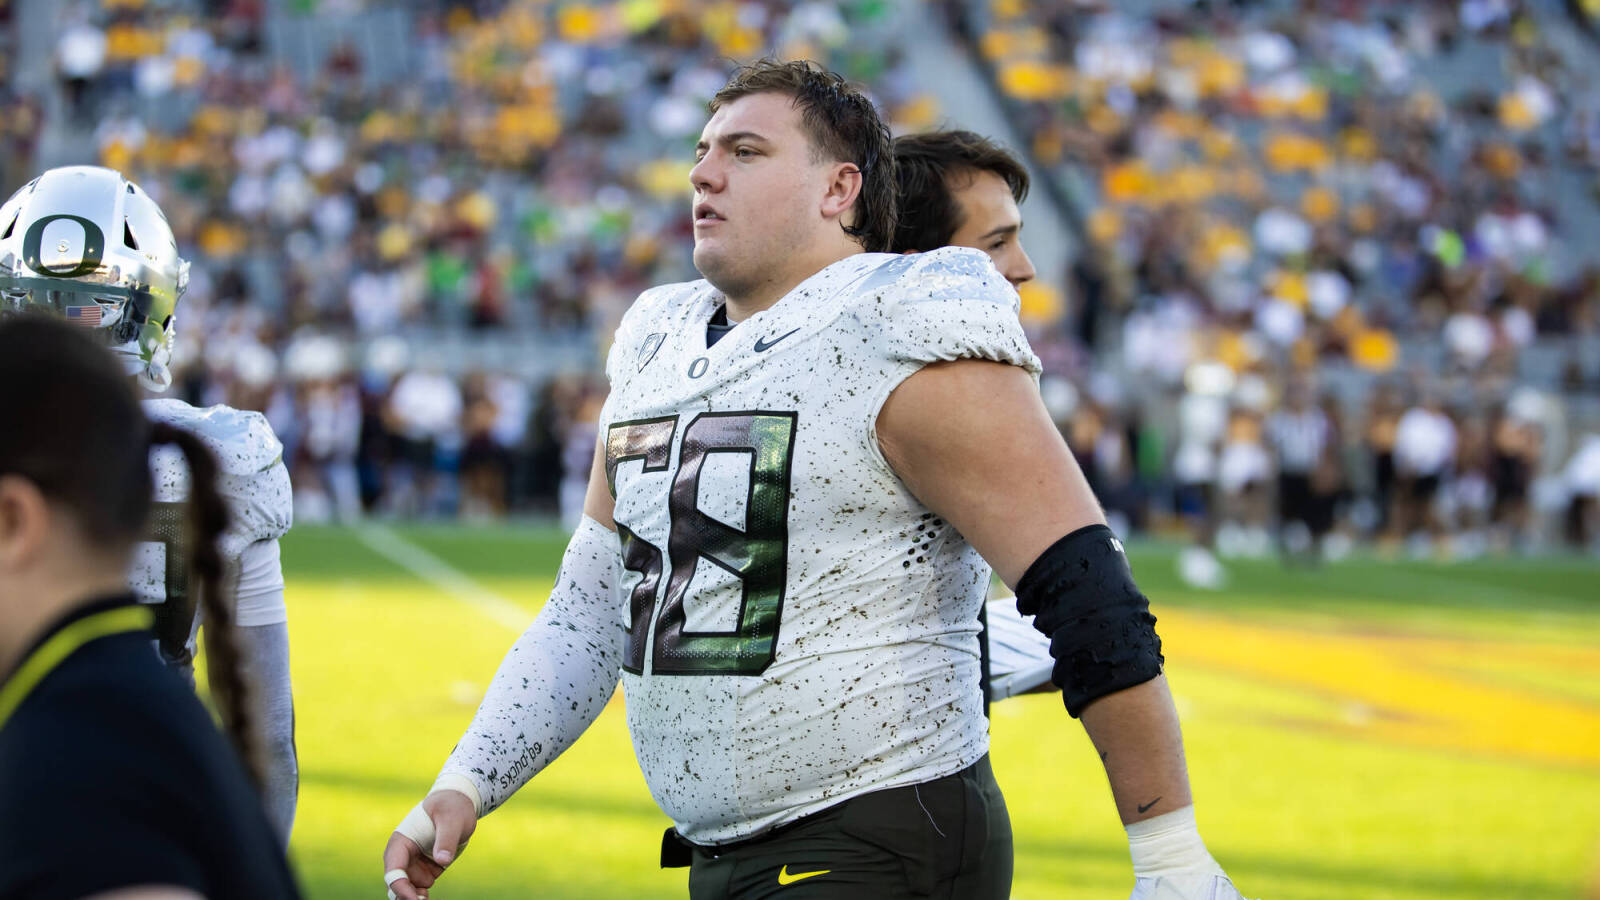 Three offensive linemen Seahawks should look to draft at No. 16